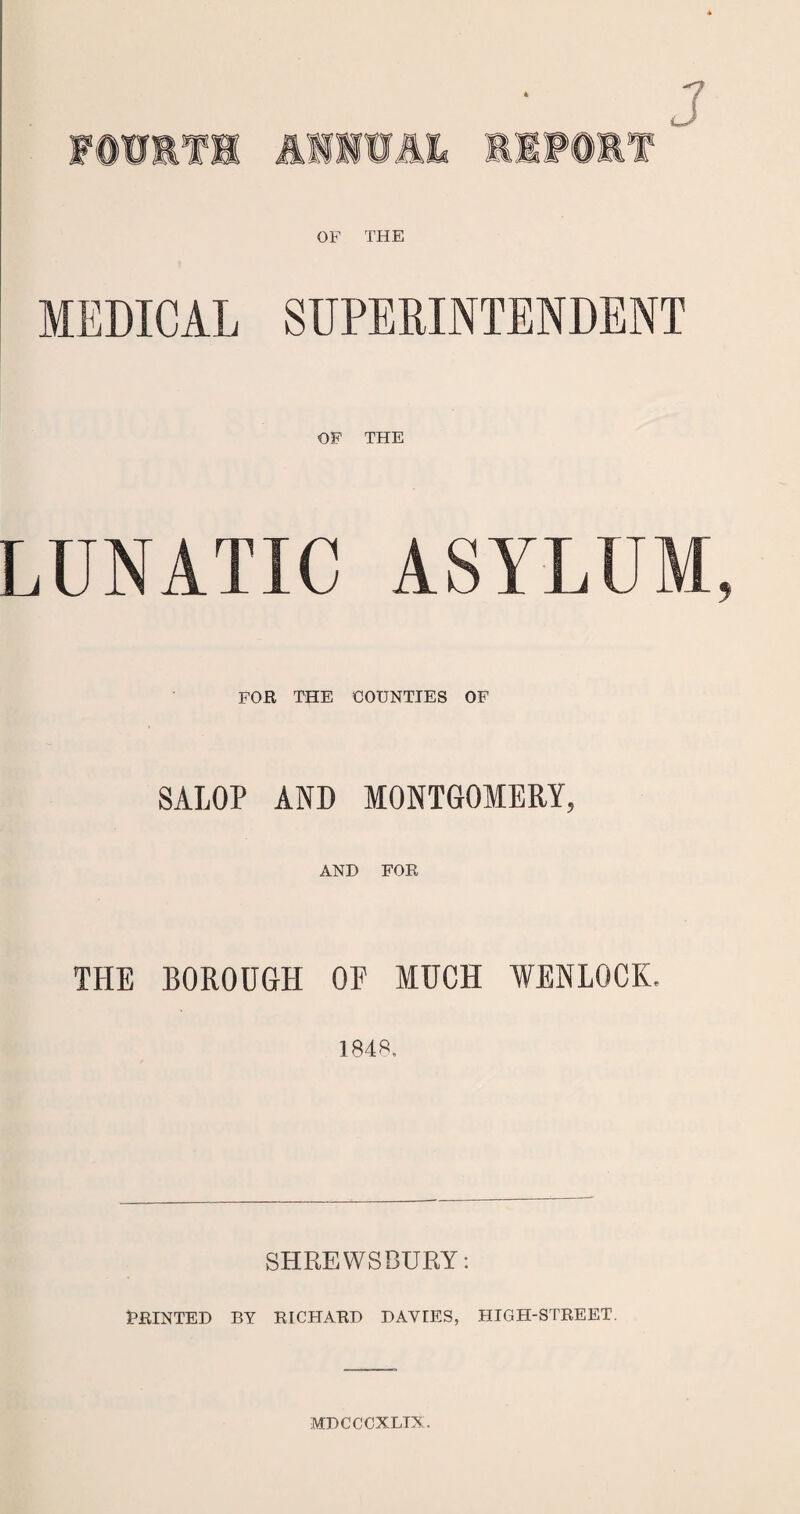 OF THE MEDICAL SUPERINTENDENT OF THE LUNATIC ASYLUM FOR THE COUNTIES OF SALOP AND MONTGOMERY, AND FOR THE BOROUGH OE MUCH WENLOCK, 1848. SHREWSBURY: PRINTED BY RICHARD DAVIES, HIGH-STREET. MDCCCXLIN.